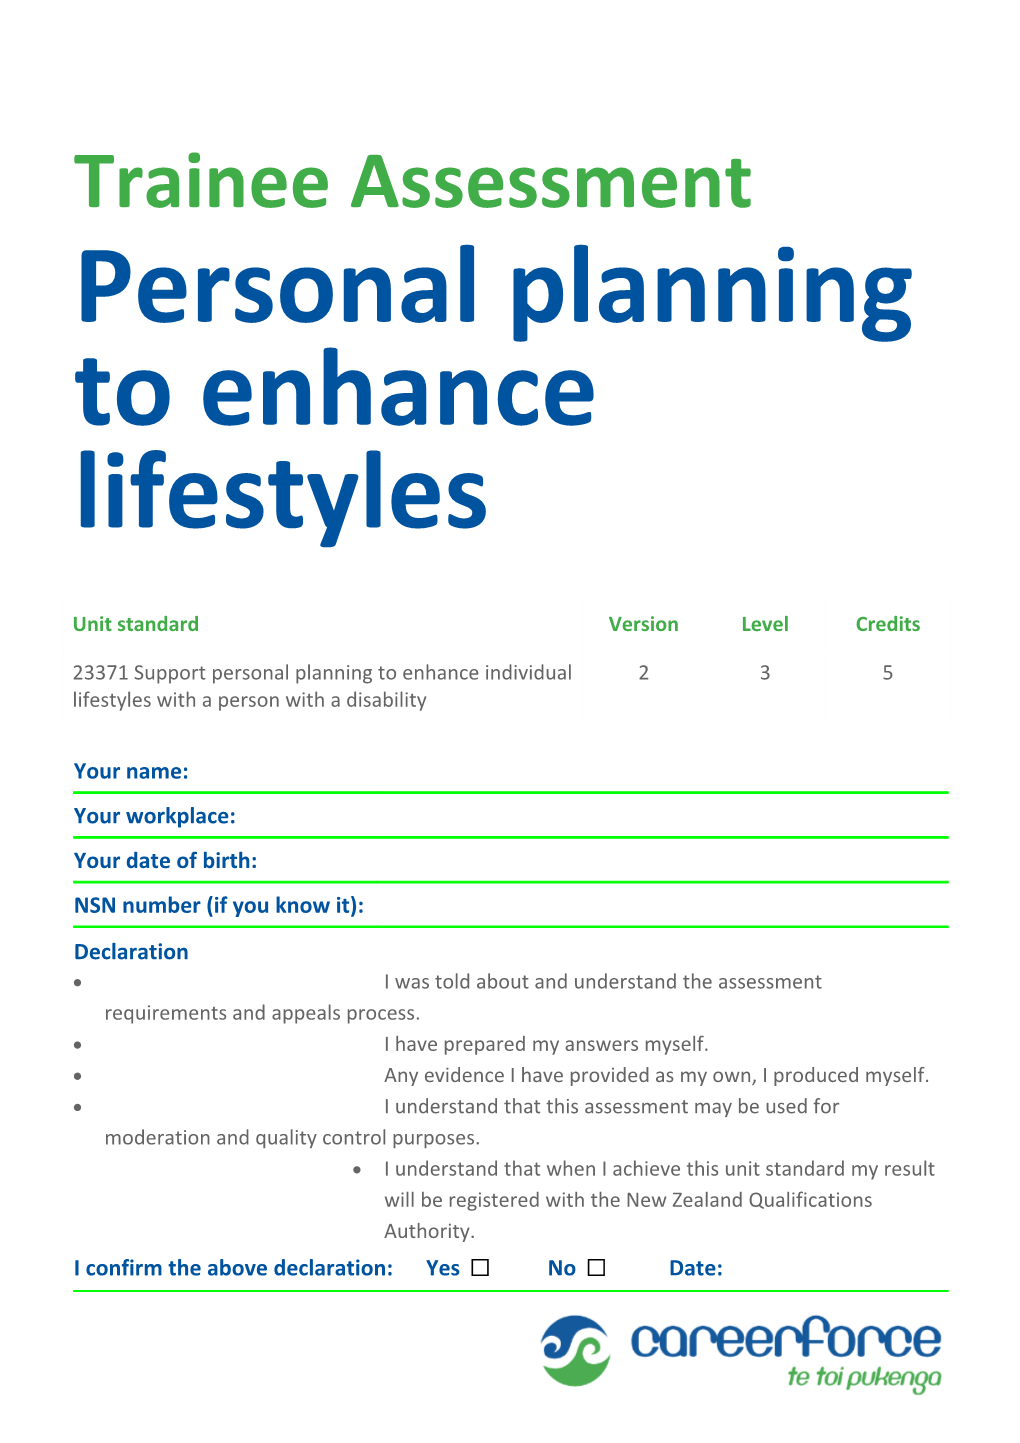 Personal Planning to Enhance Lifestyles